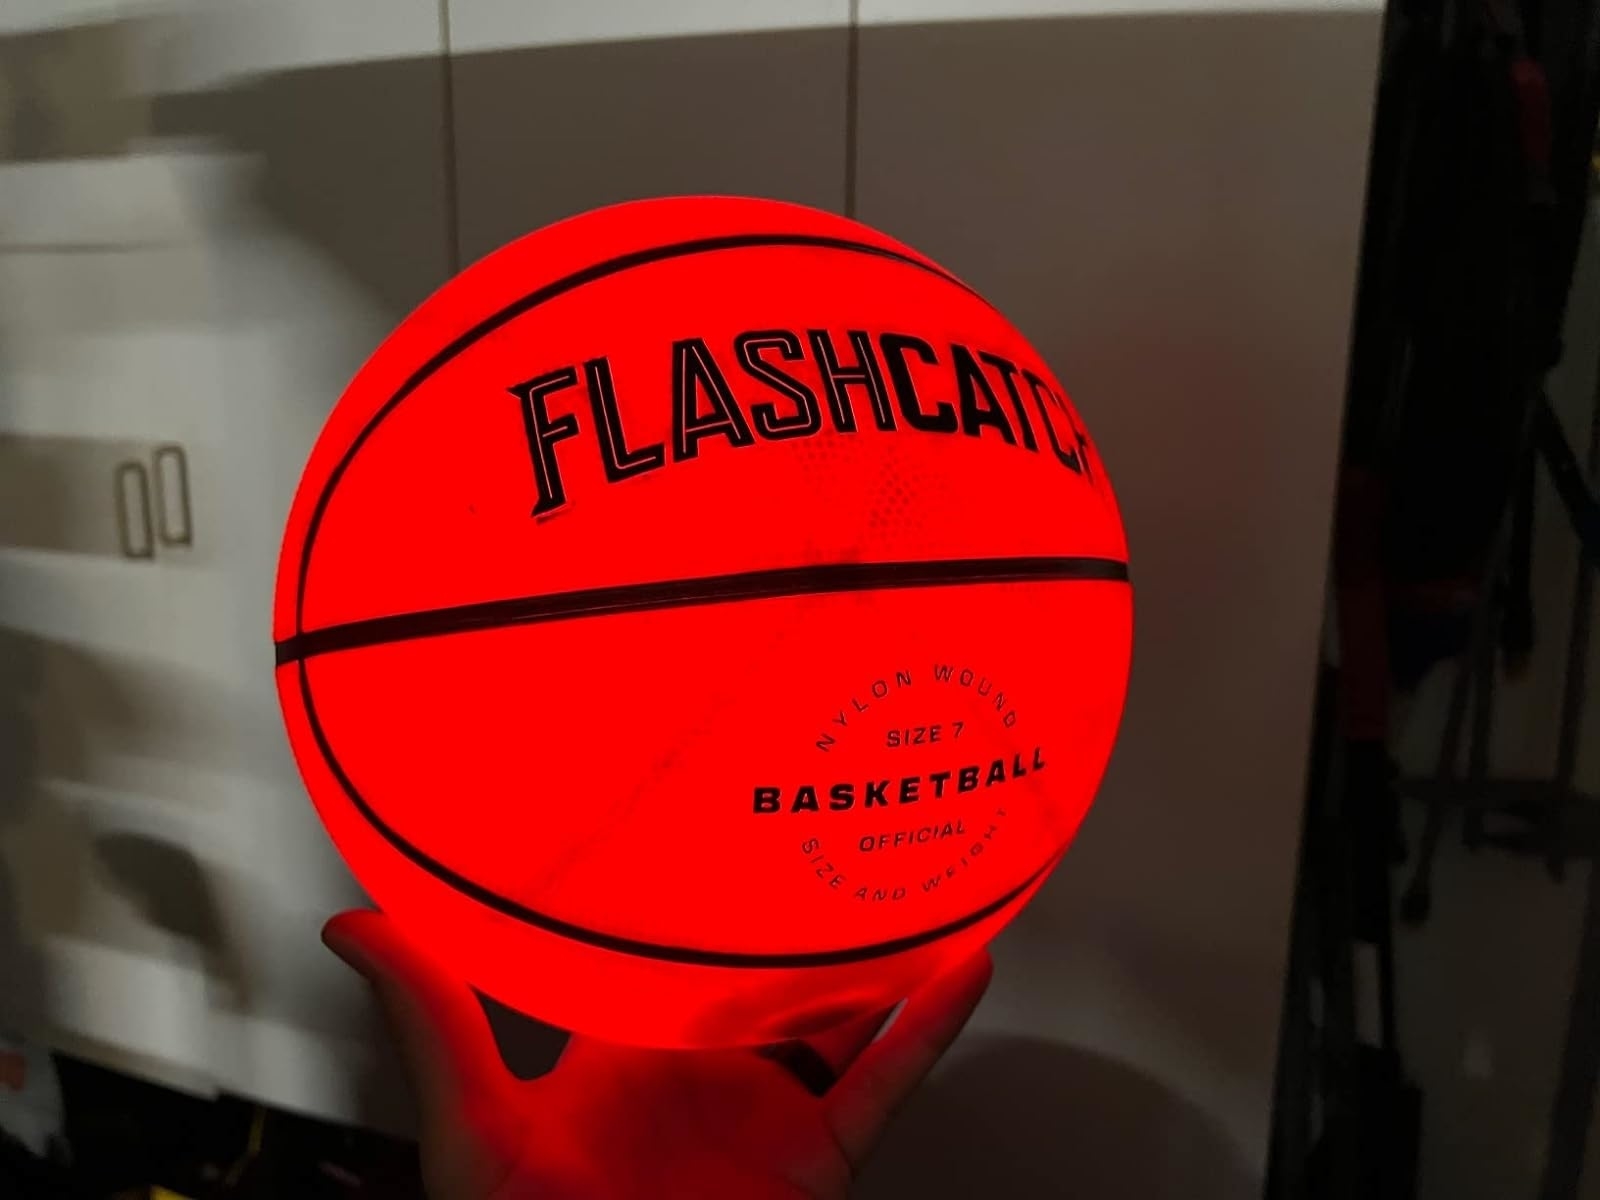 A hand holds up a FLASHCATCH basketball — it glows a bright red orange